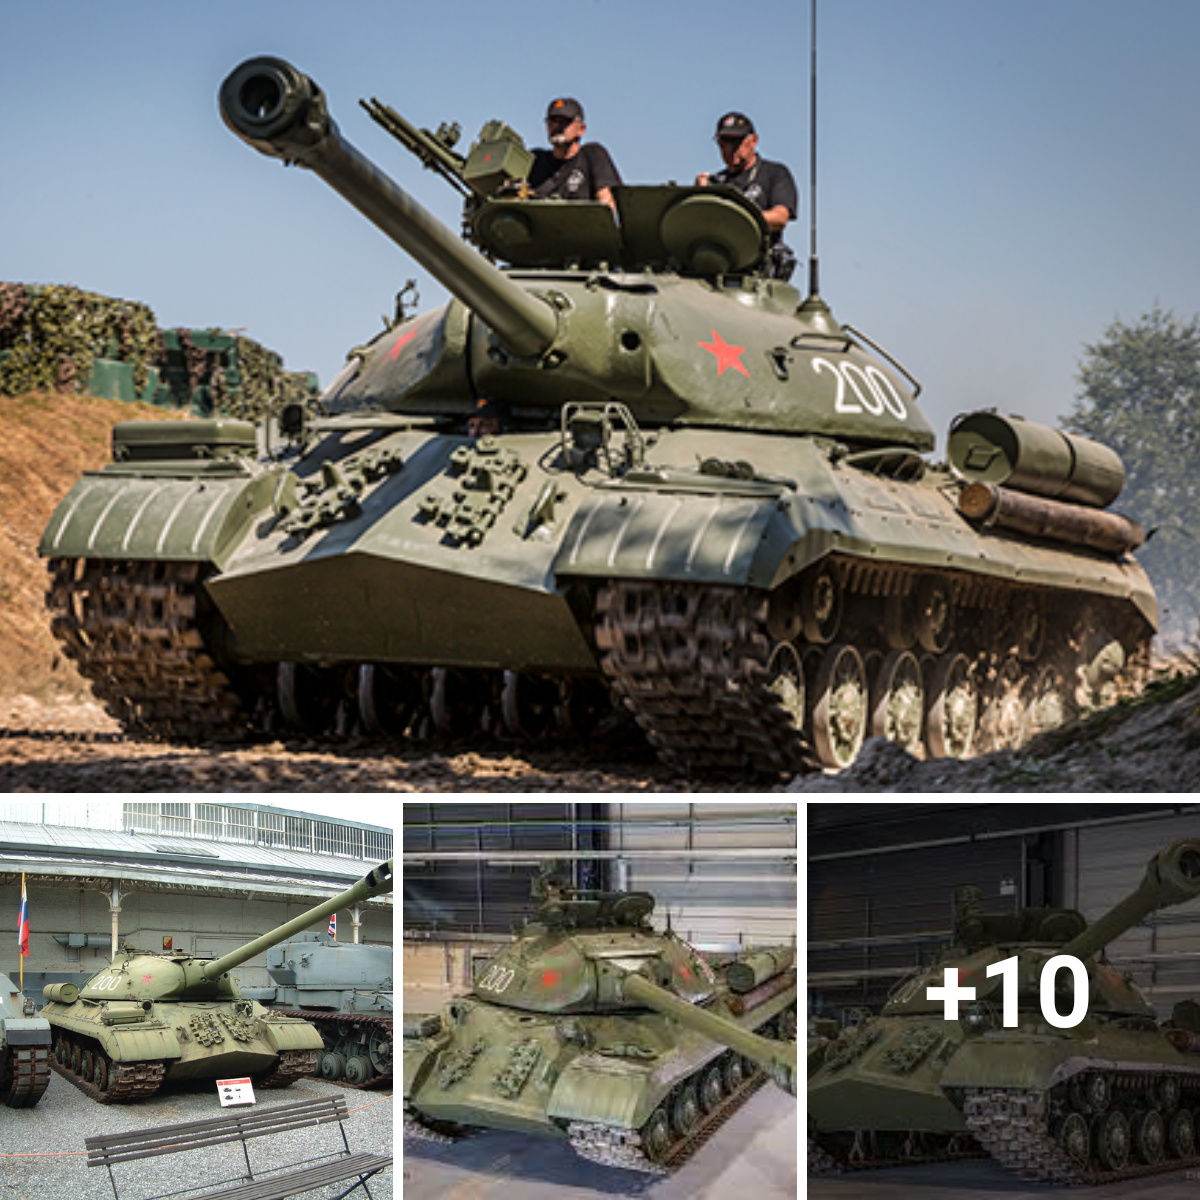 Wonderful news! At TANKFEST 2024, the IS-3M and FV4005 will be present. Come watch this amazing display with us!